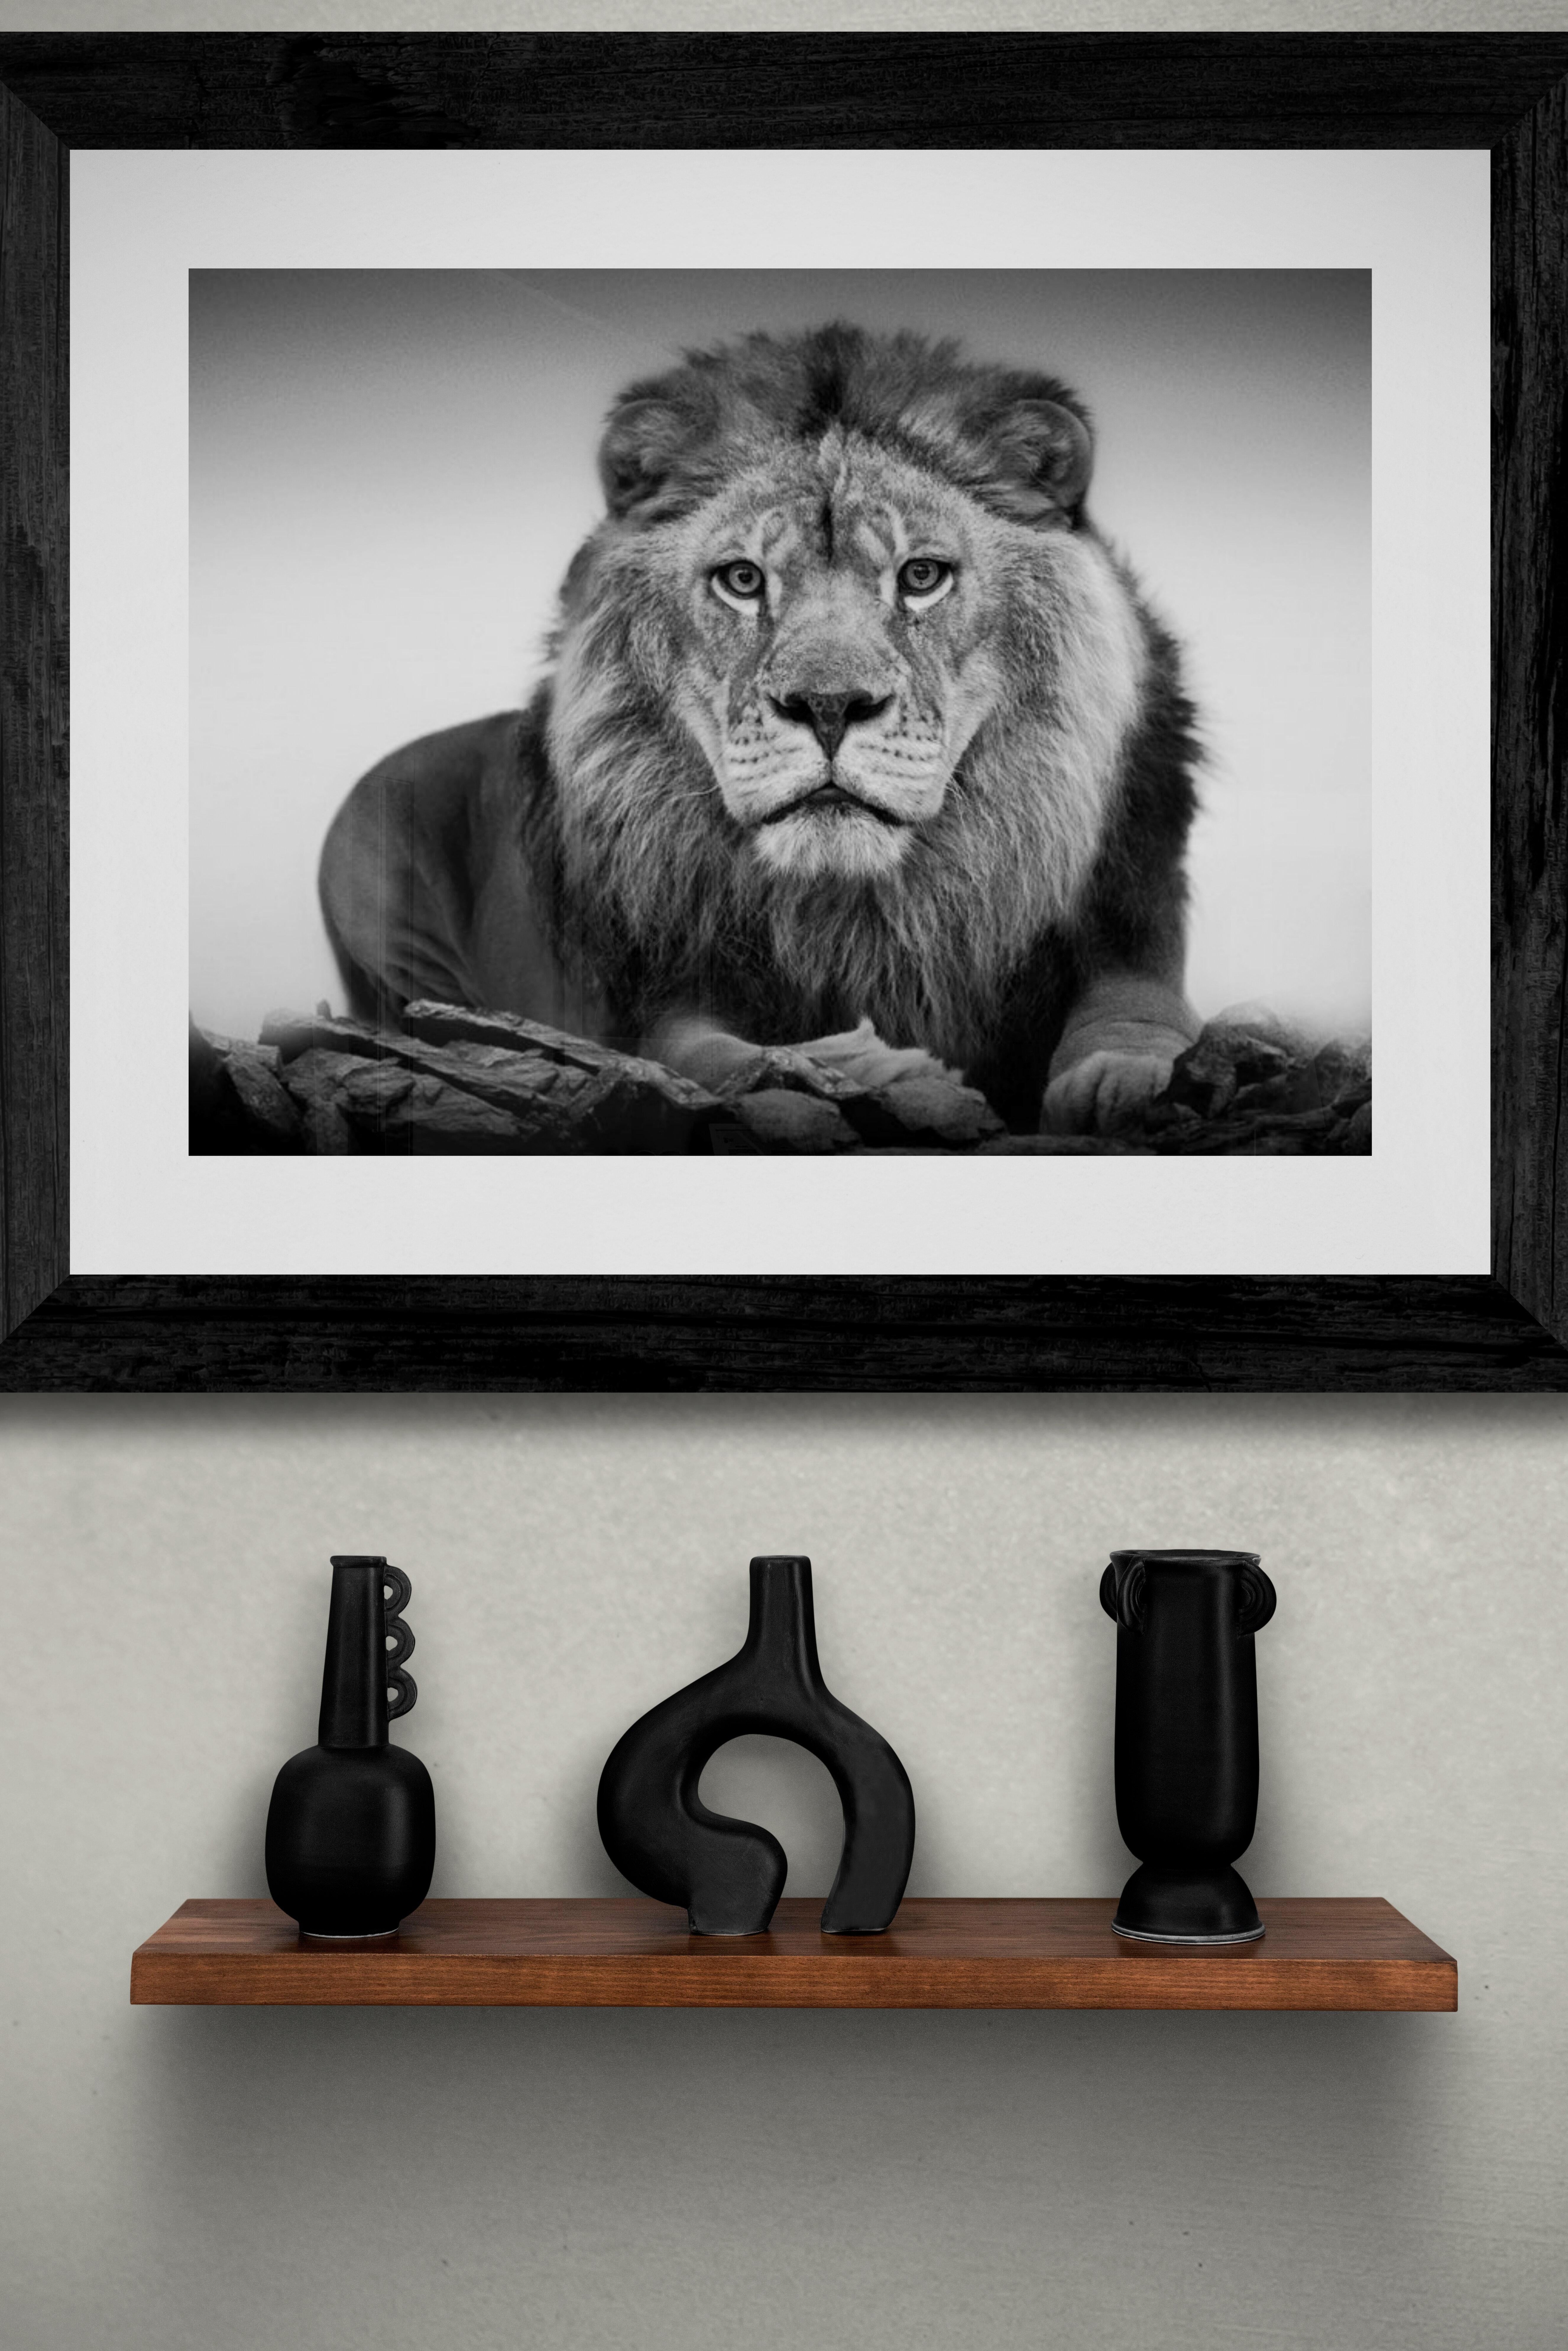 This is a contemporary photograph of an African Lion. 
28x40
Singed and Numbered
Archival Pigment print.
Framing available. Inquire for rates. 

FREE SHIPPING

Shane Russeck has built a reputation for capturing America's landscapes, cultures and